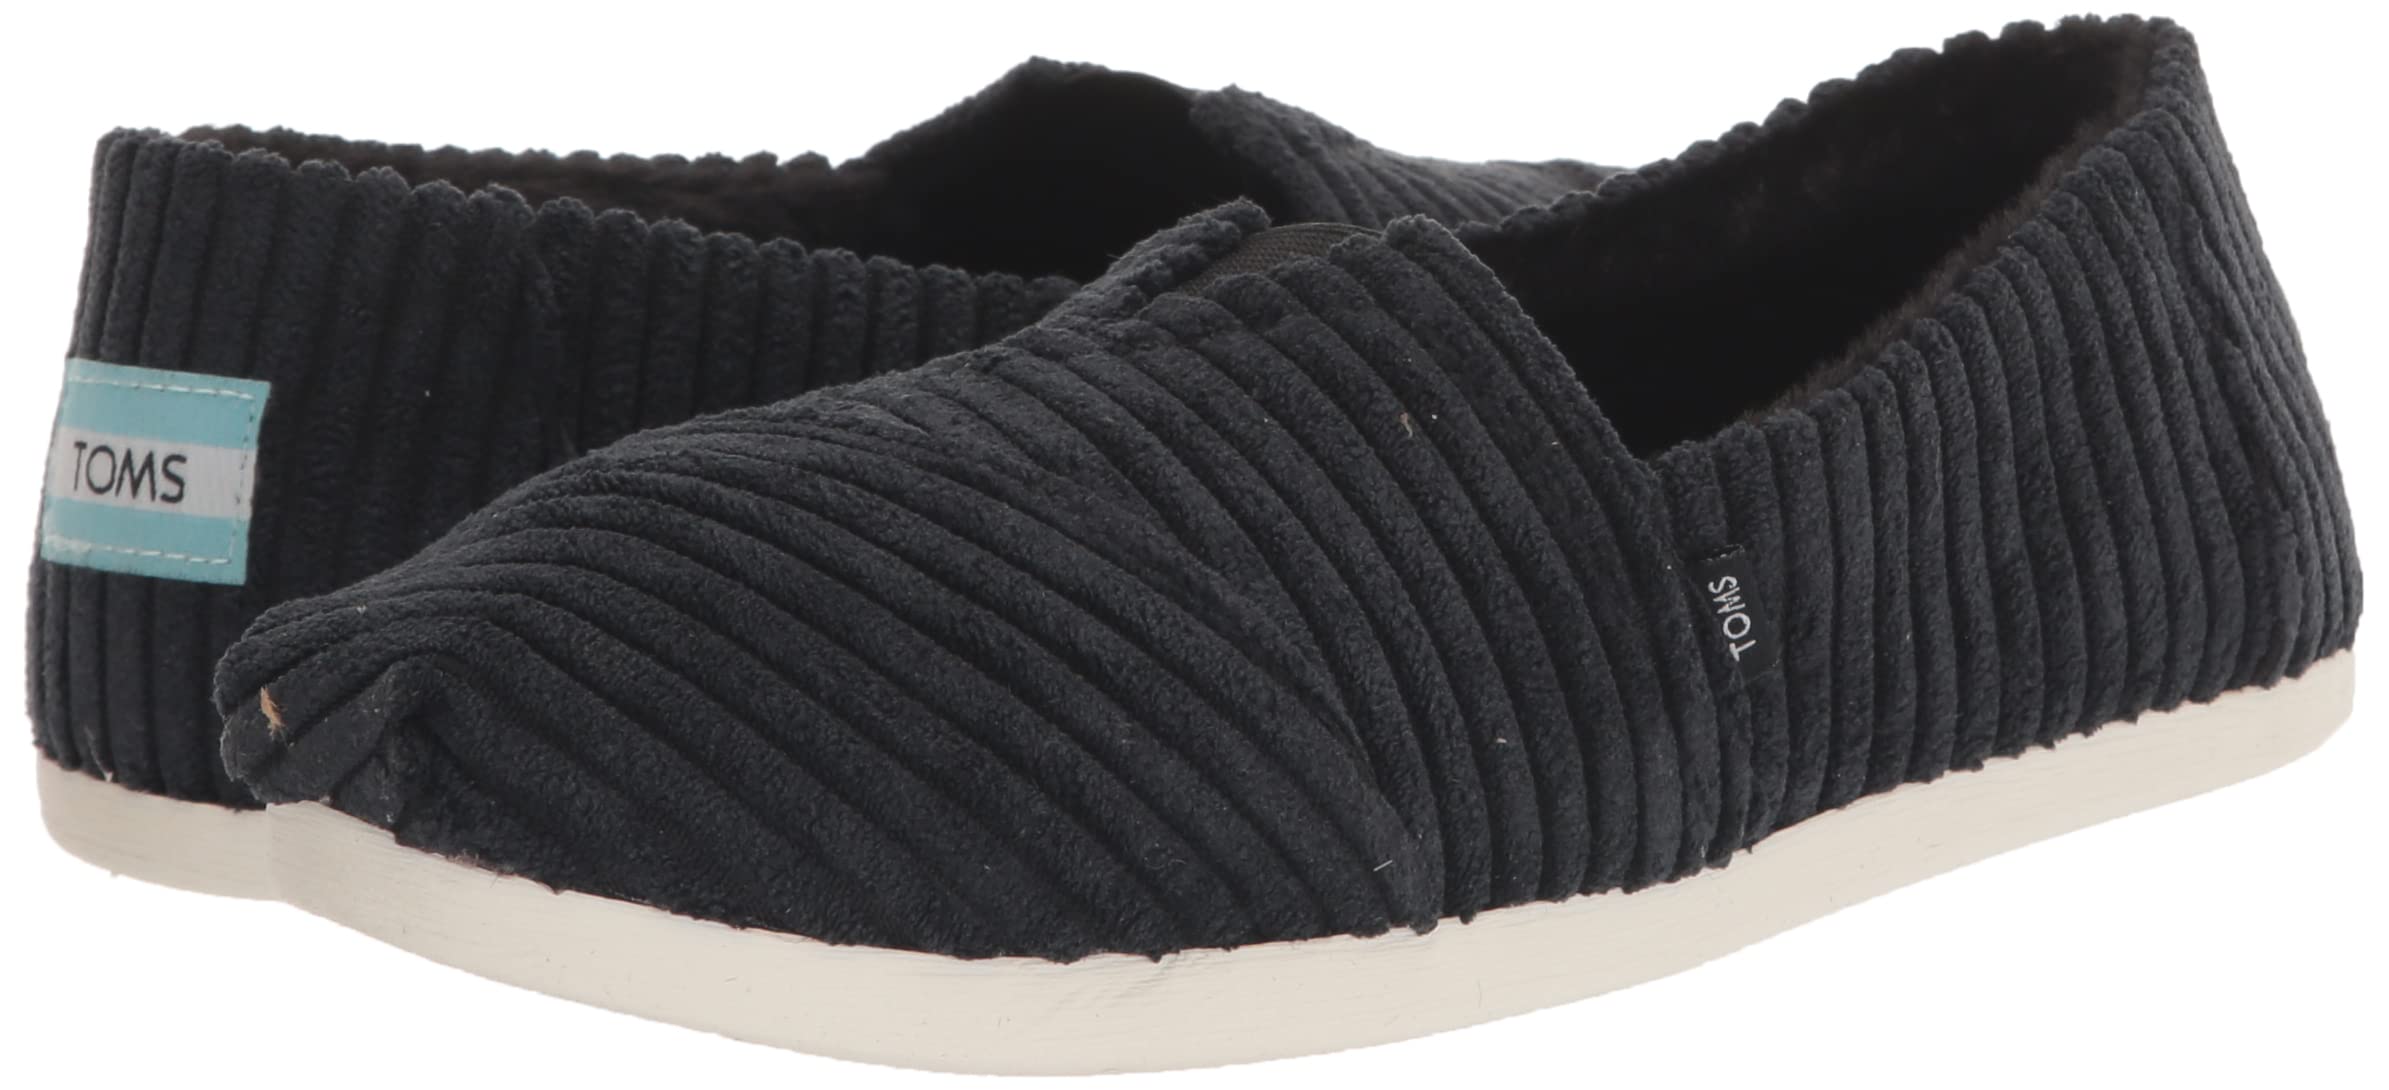 TOMS Women's Alpargata Recycled Cotton Canvas” Loafer Flat, Black, 7